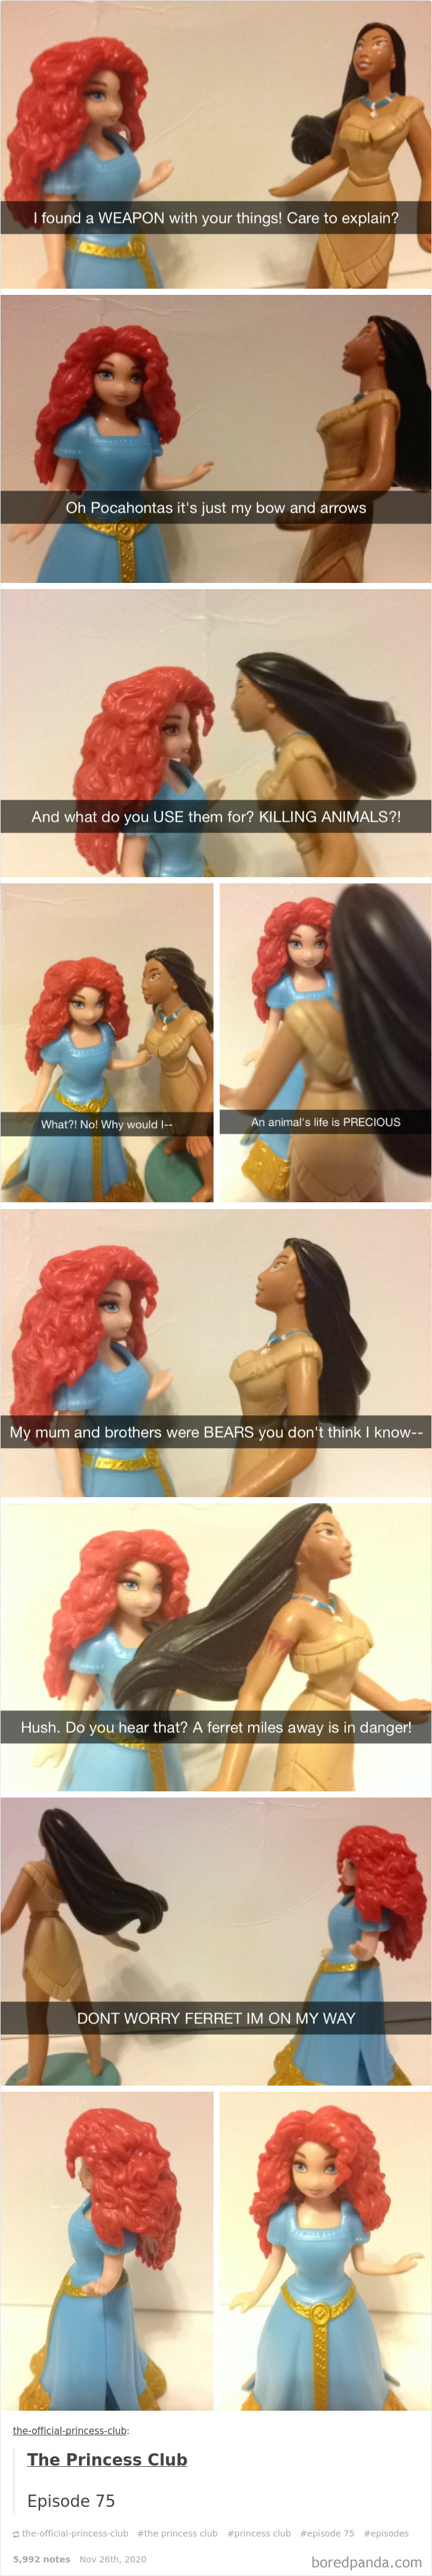 Pocahontas Protects And Preserves